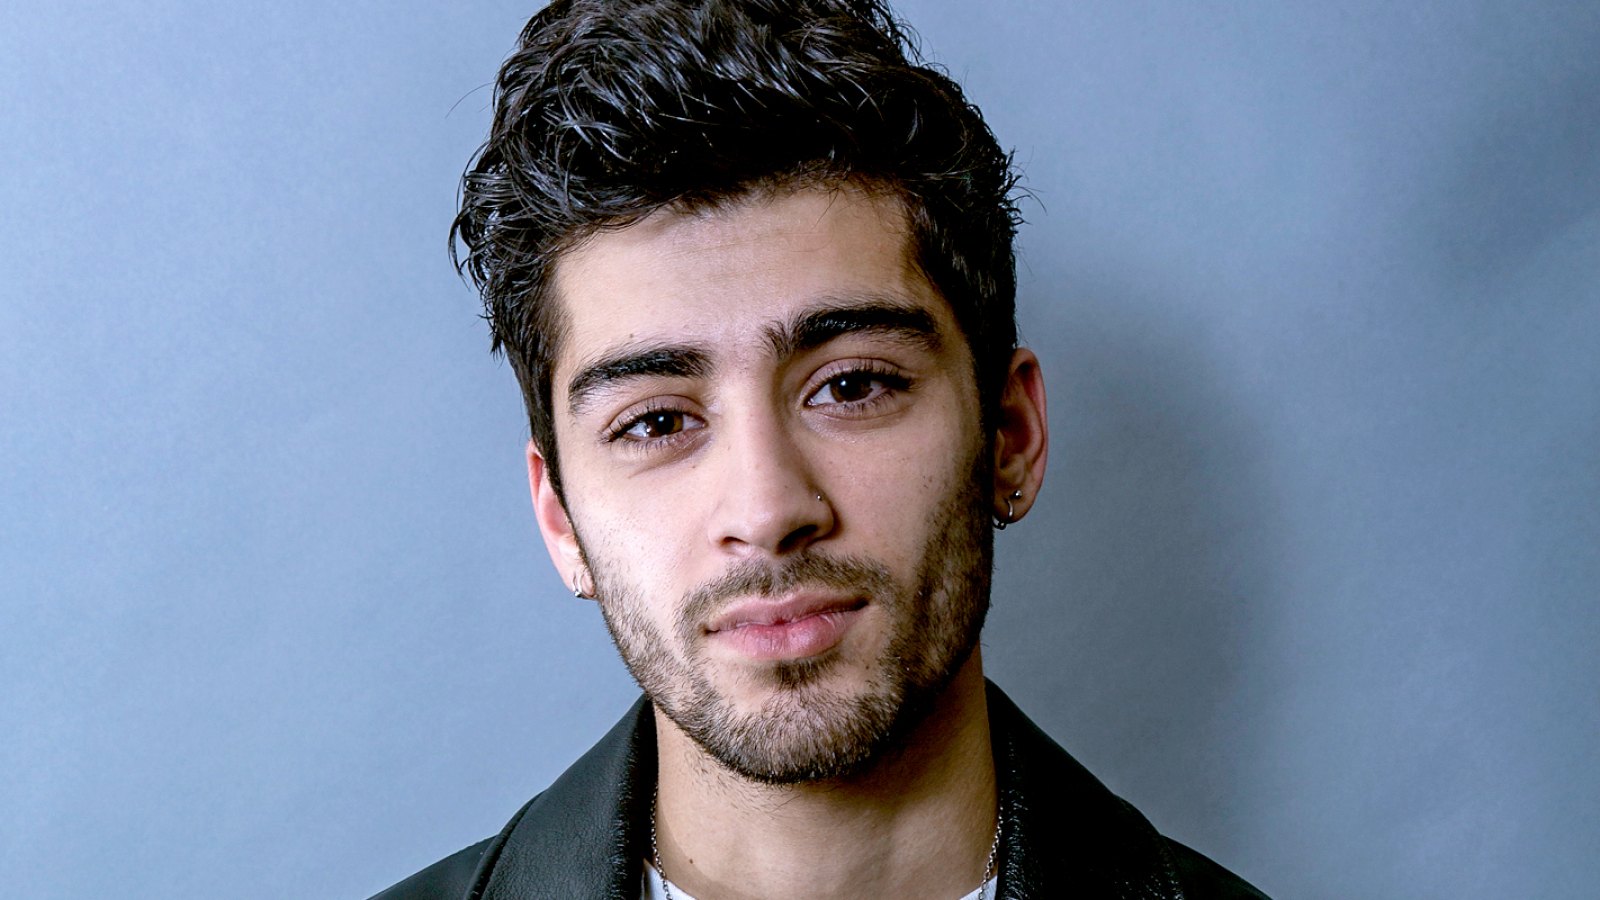 Zayn Malik, formerly of One Direction, poses for a portrait in West Hollywood, Calif., to promote his new book, "Zayn."